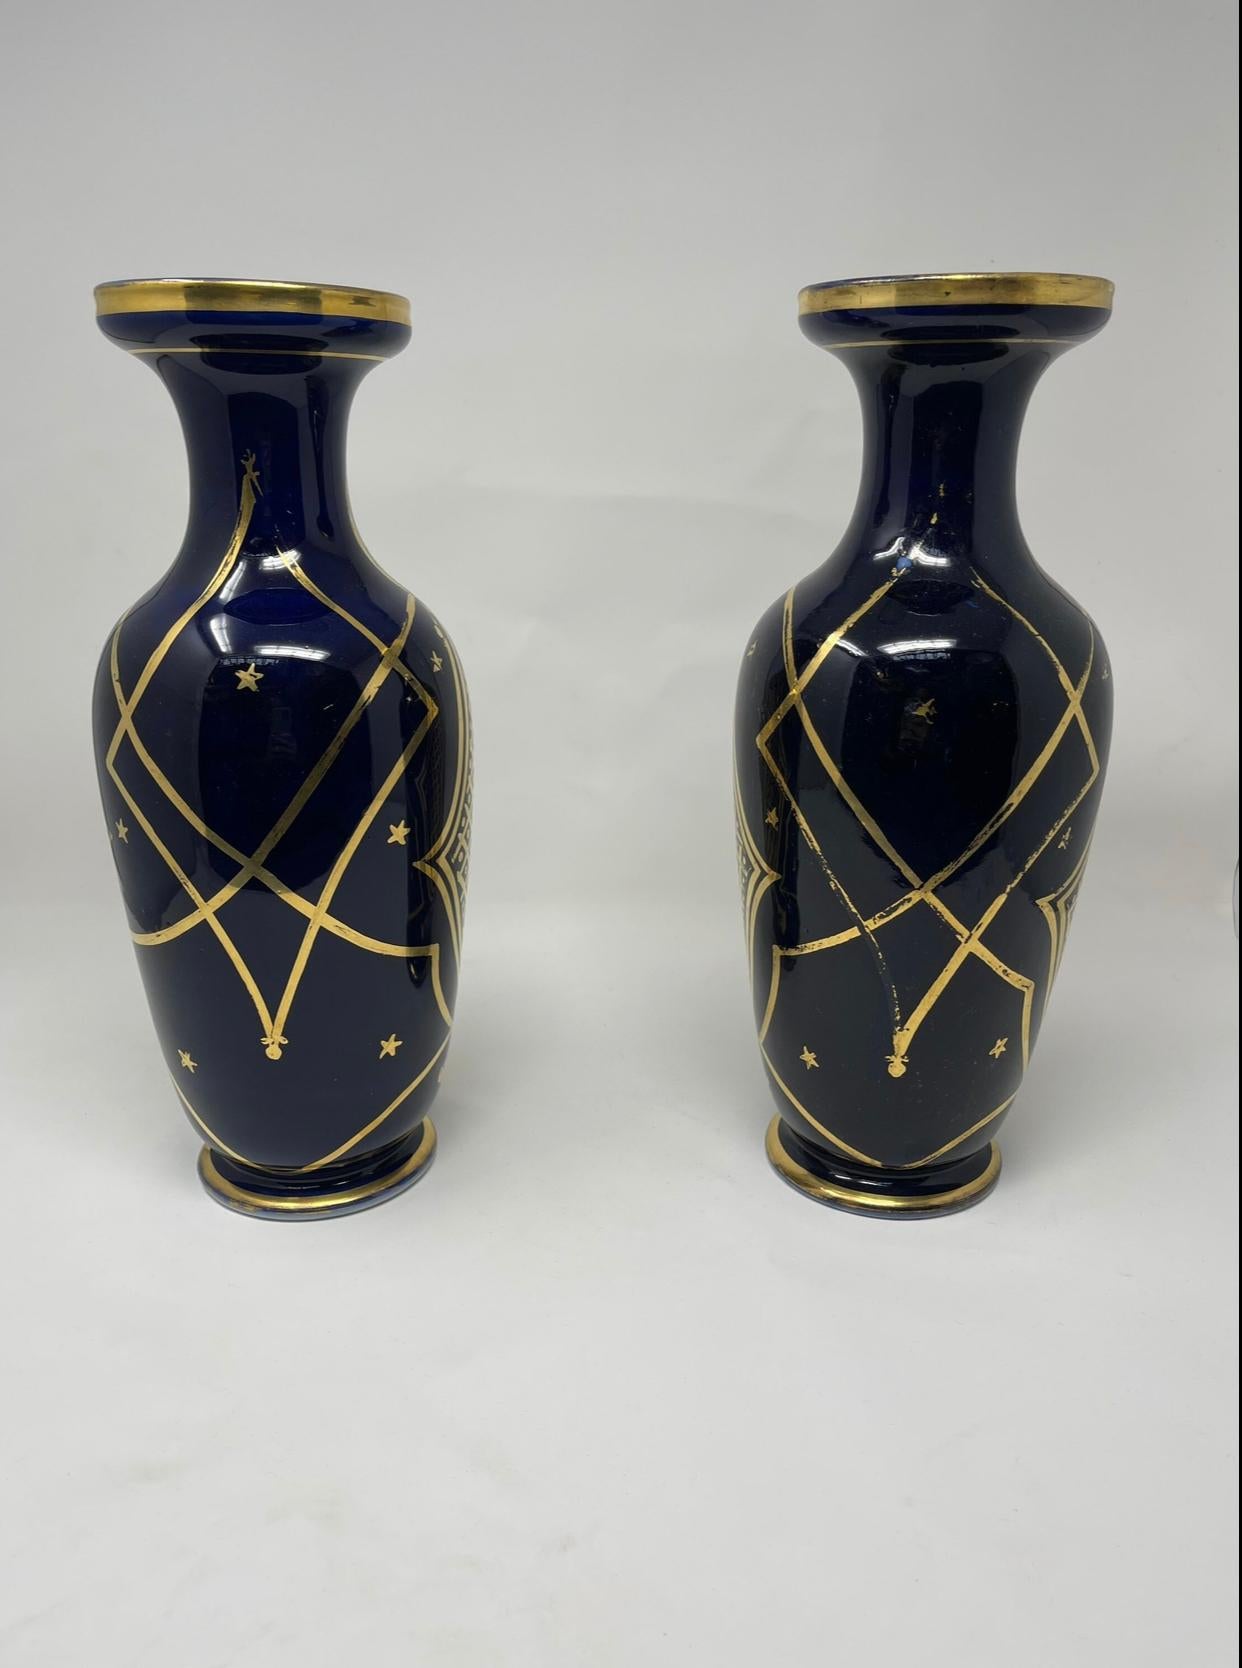 Antique French Gilded Porcelain Vases with Hand Painted Courting Scene - Pair For Sale 2